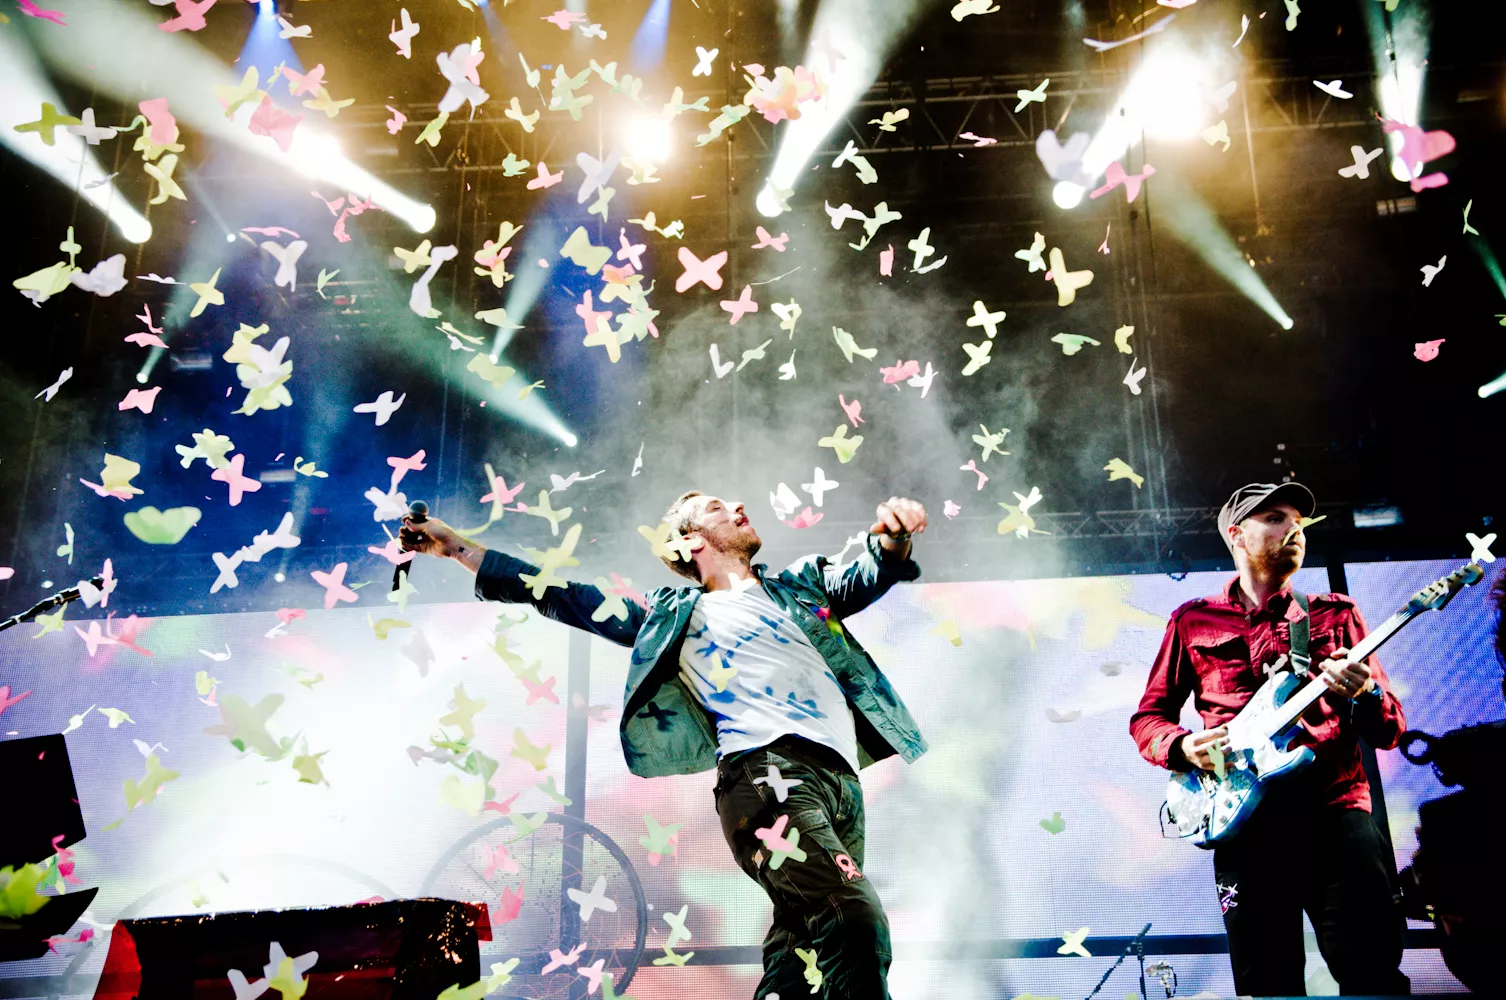 A Coldplay fan bought the wrong ticket – now the band is offering a tour and a concert